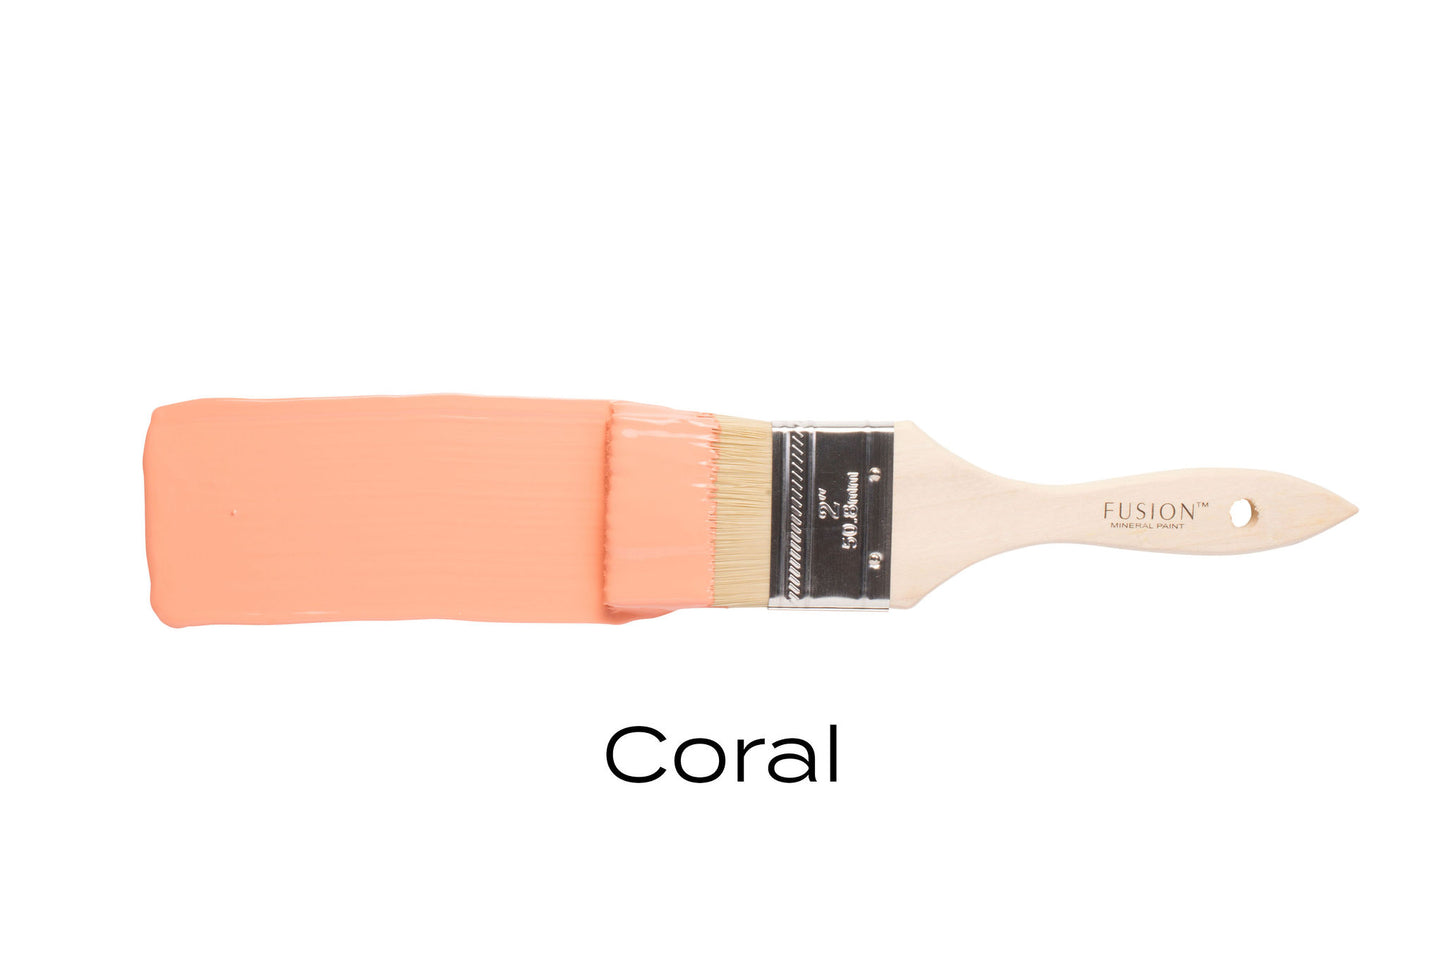 Coral.